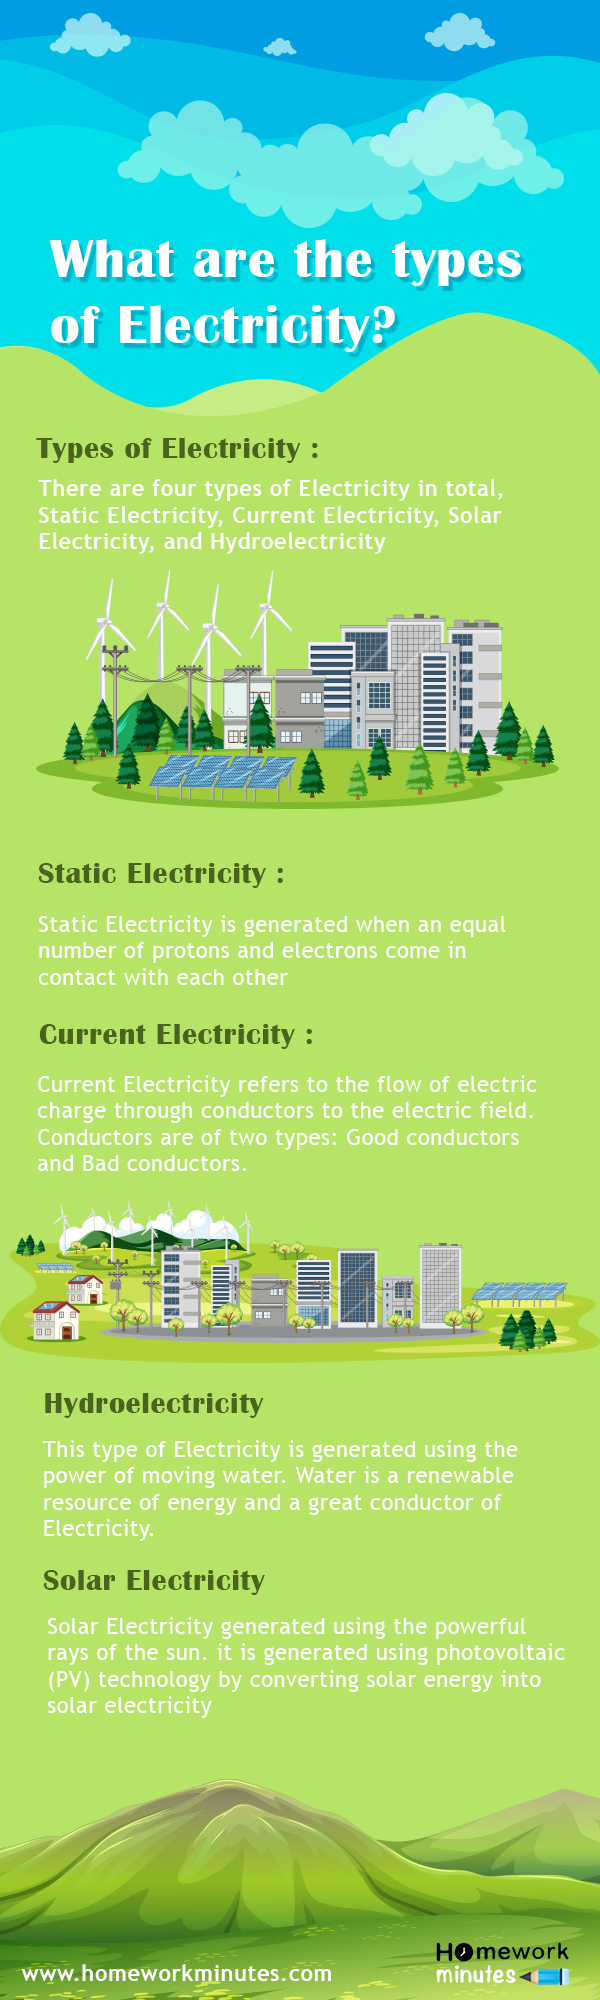 Types of Electricity Archives - Infographics - Homework Joy